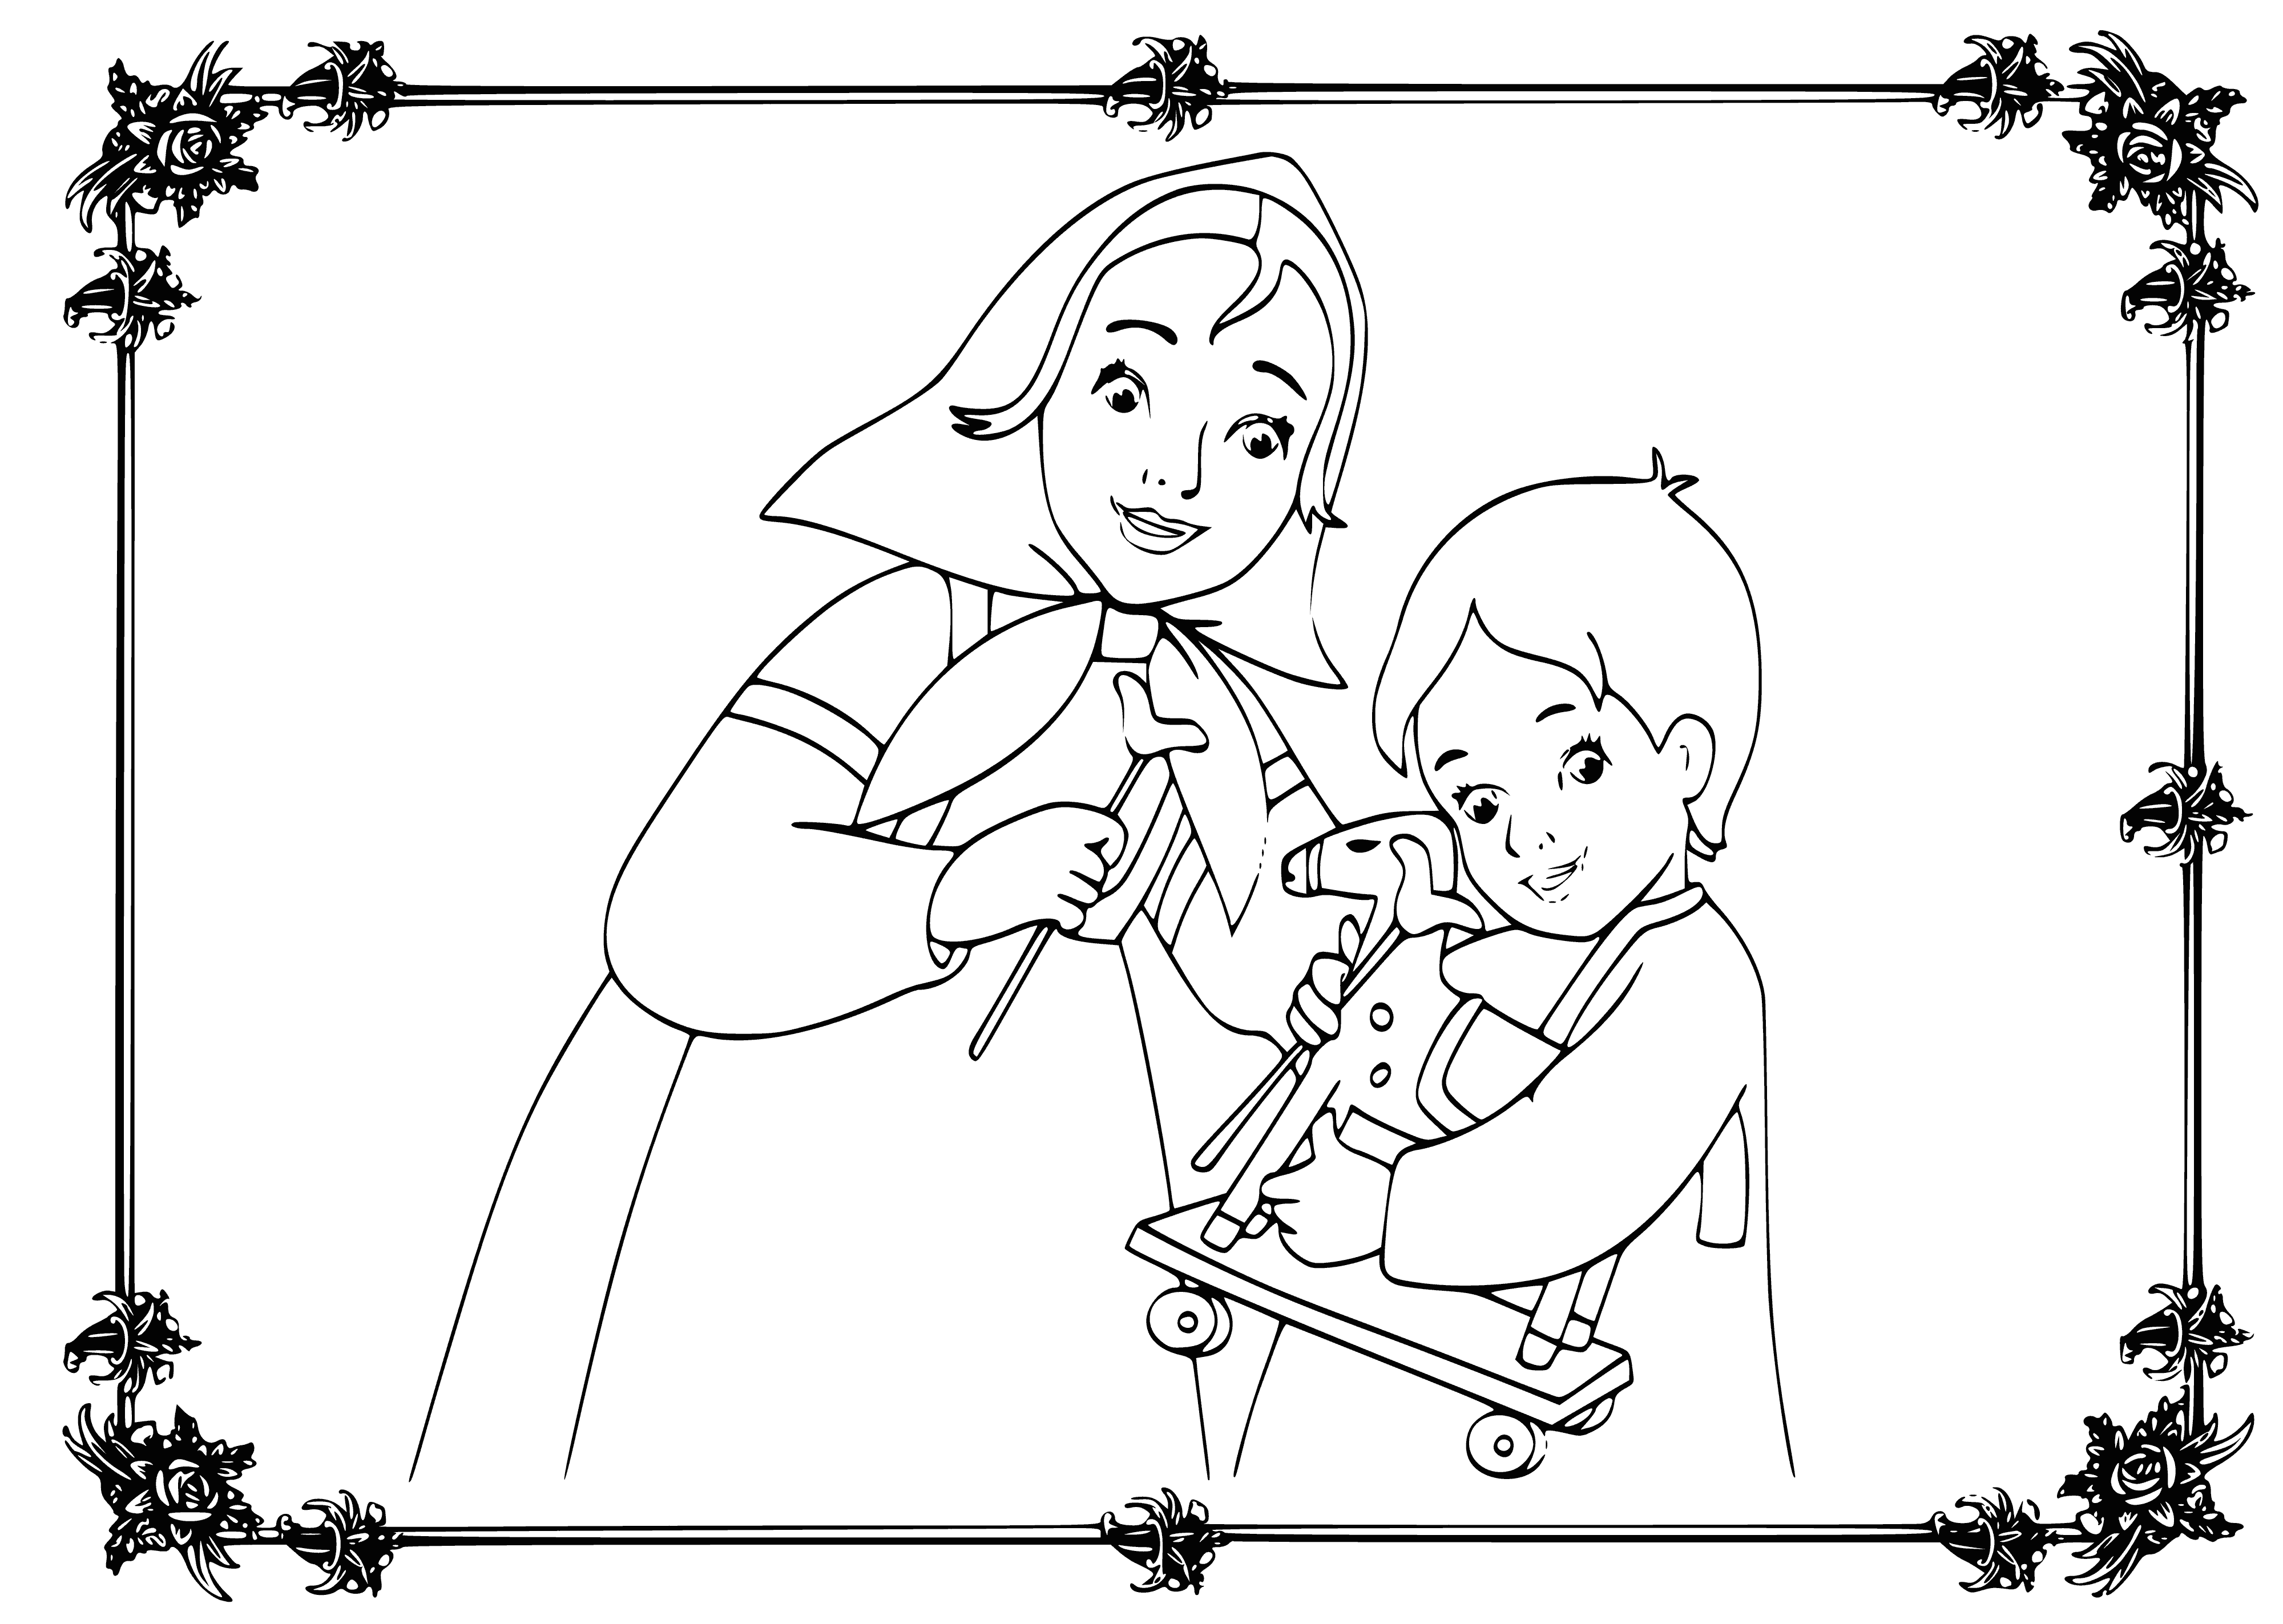 coloring page: Brother & sister walking in forest: brother kills deer, sister collects blood in cup. Brother turns to stone statue. Sister's tears turn him back human.